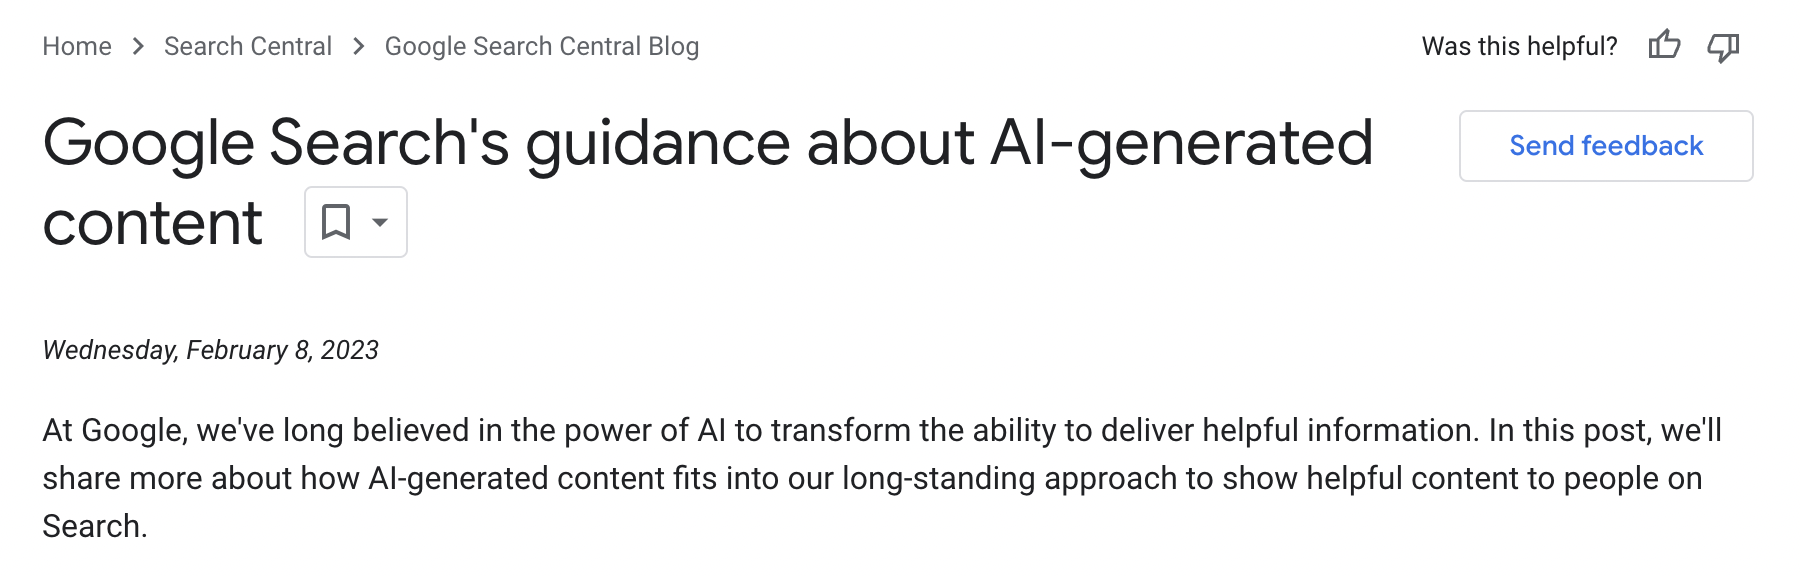 Google Search's guidance about AI-generated content